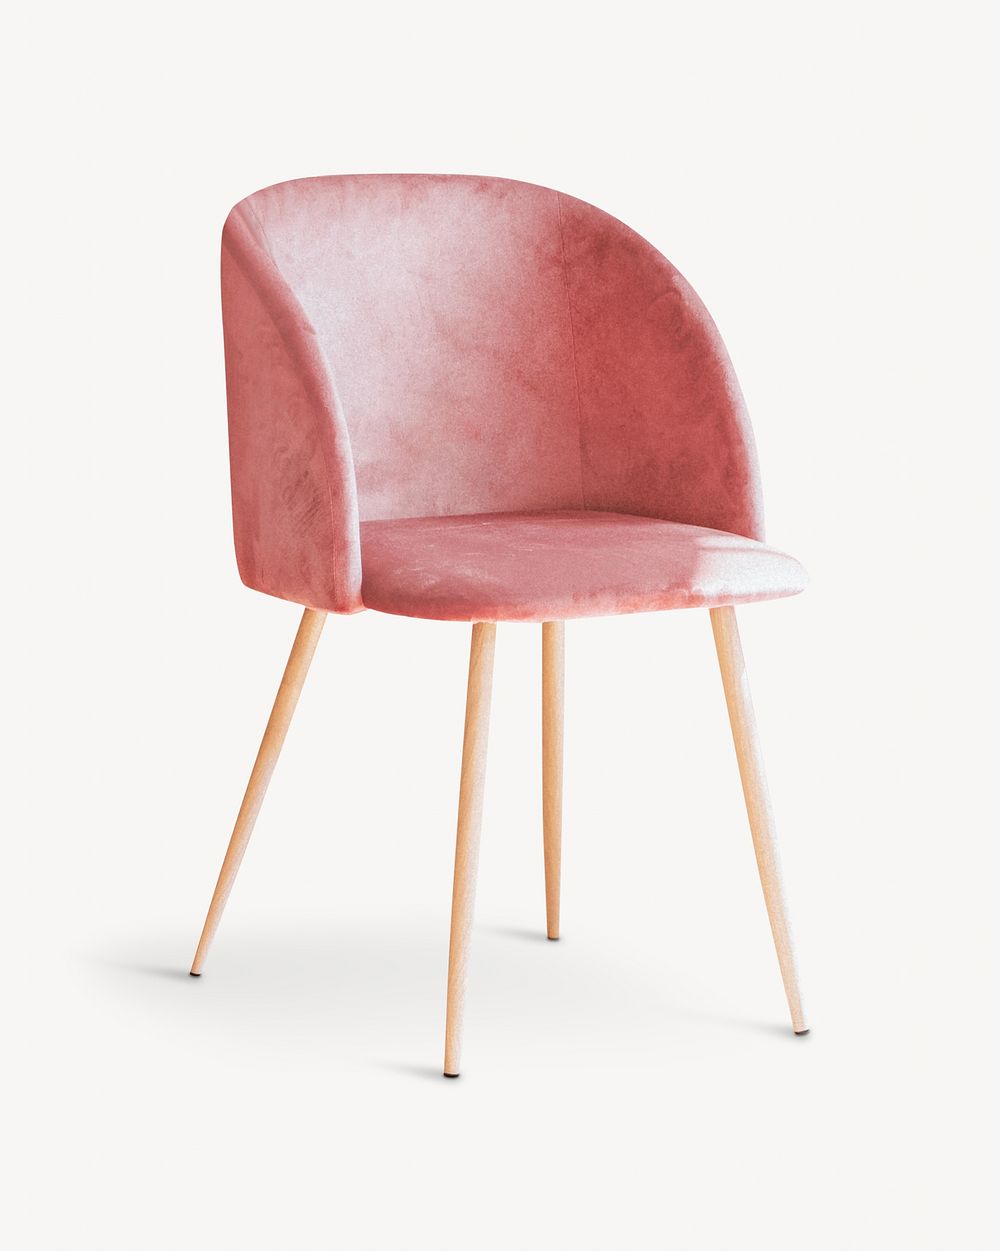 Pink chair, isolated object on white